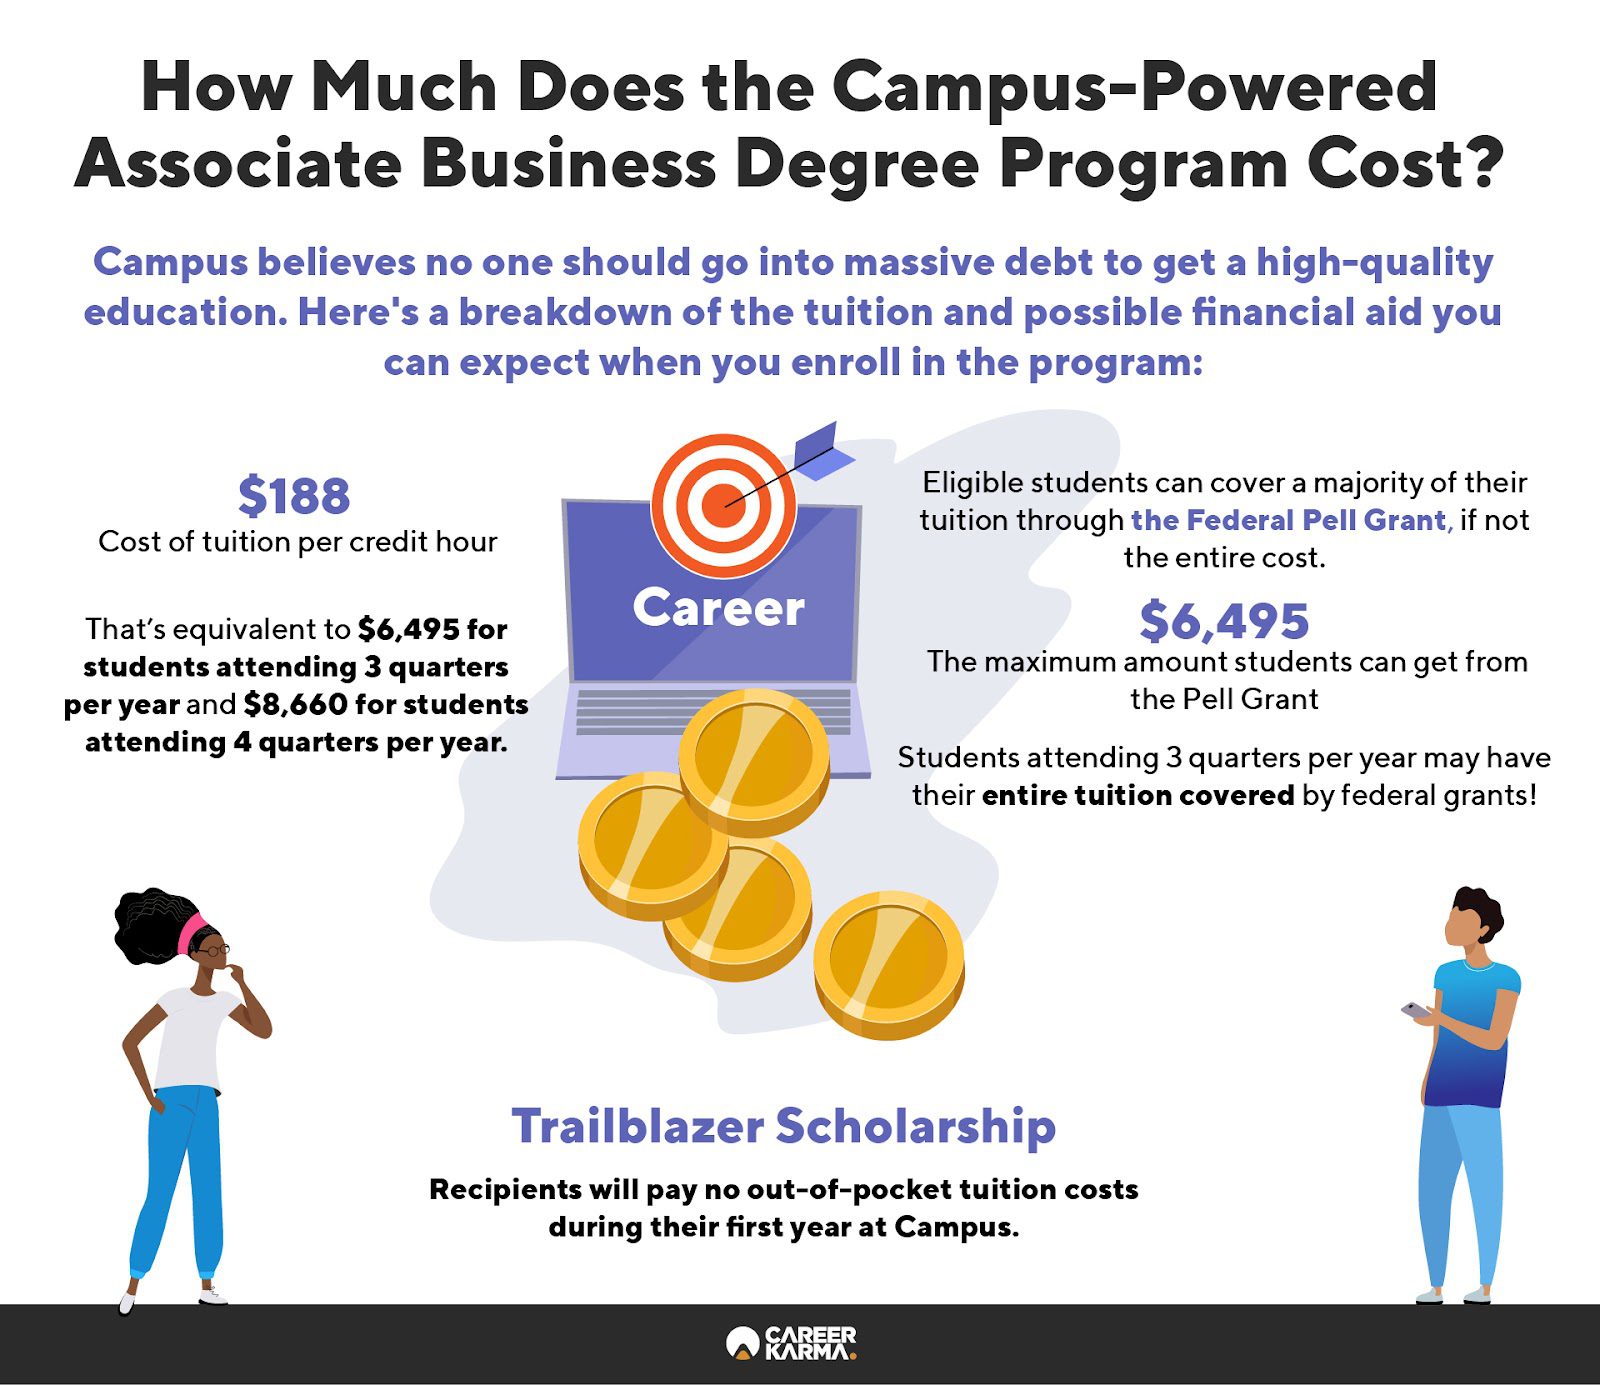 An infographic showing the tuition breakdown and available financial aids at Campus